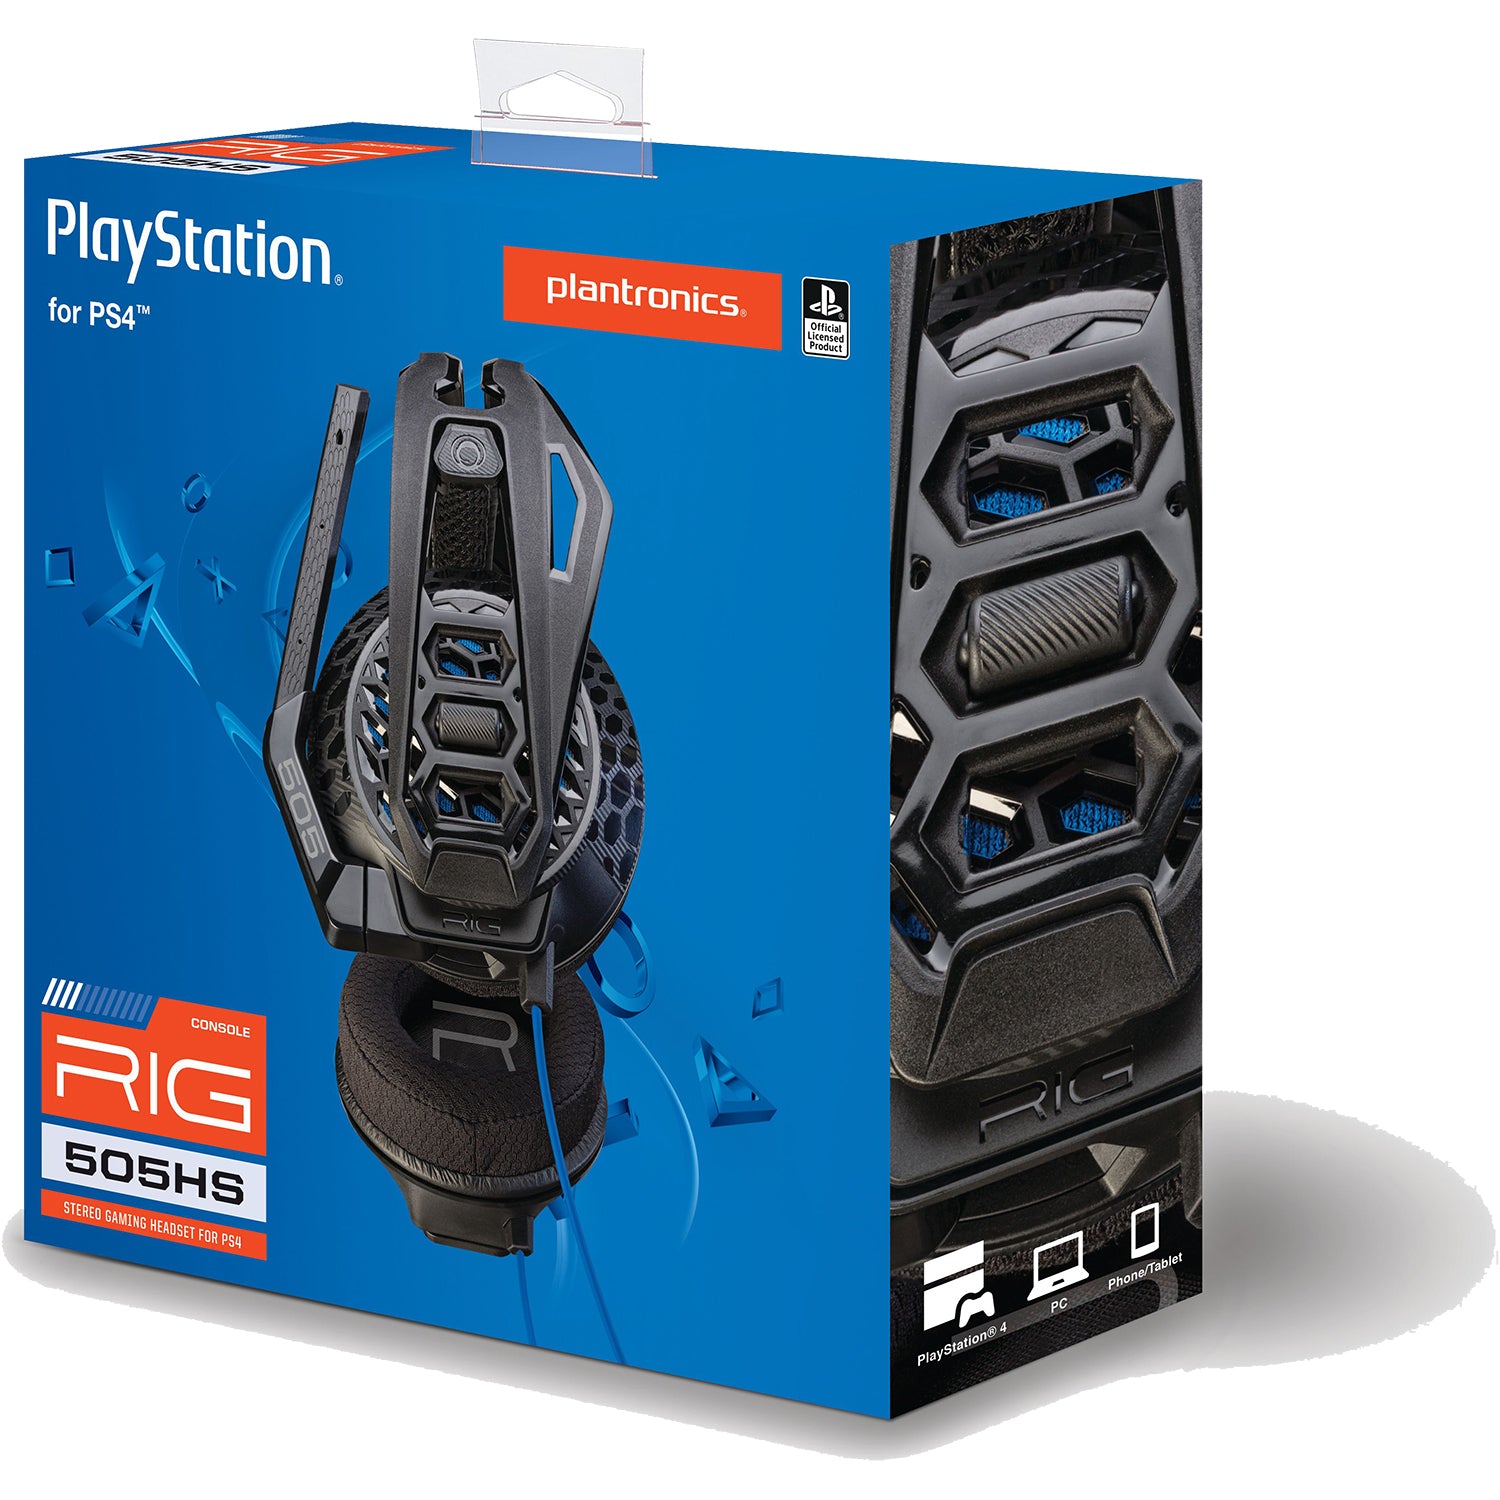 Plantronics RIG 505 HS Gaming Headset for Playstation 4, PC with Microphone - Pro-Distributing